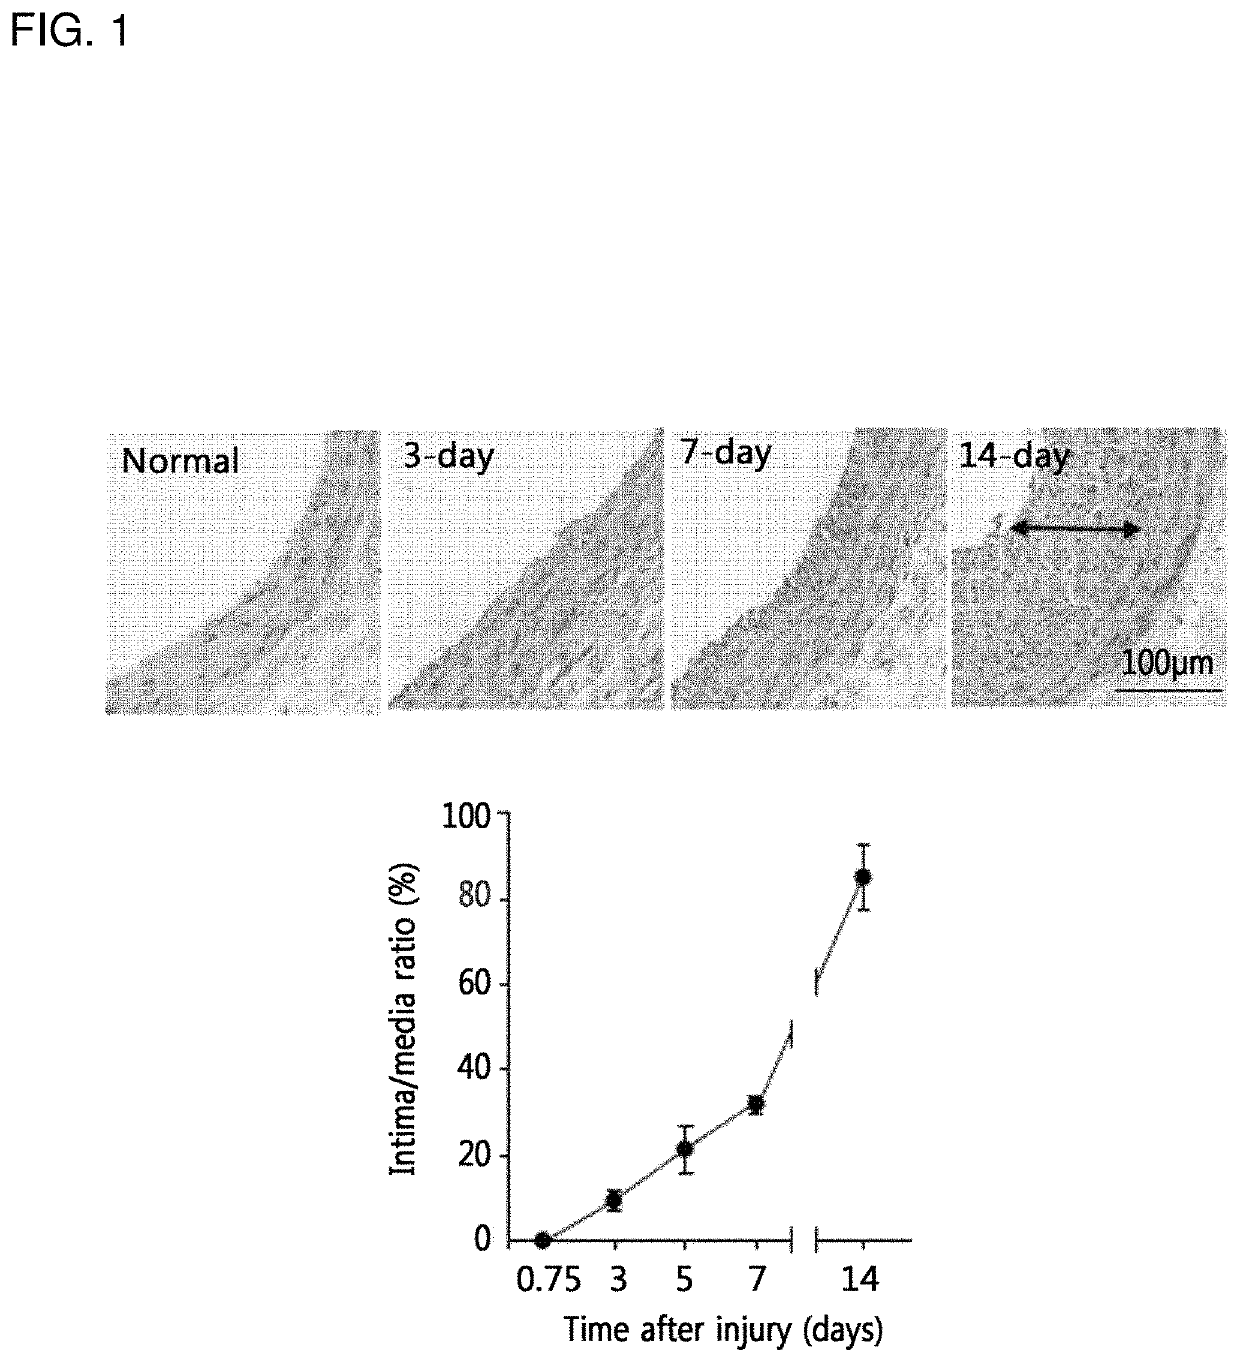 Biomarker for diagnosing vascular diseases and the uses thereof